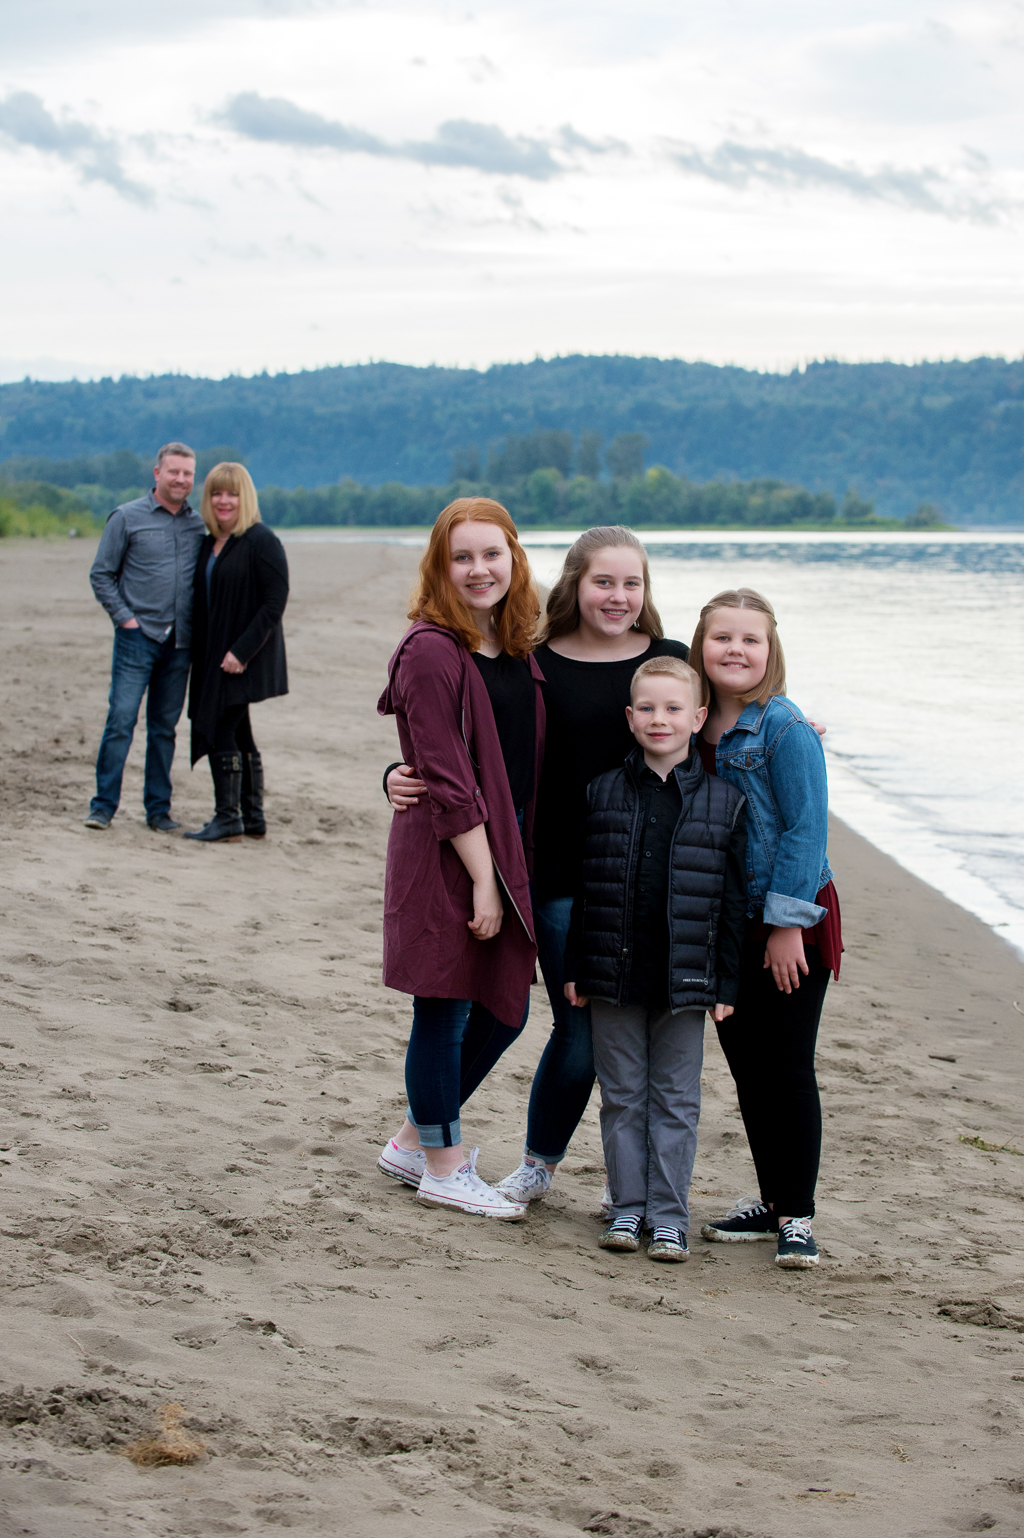 4 siblings hug together in the foreground while their parents hug in the background beside the columbia river